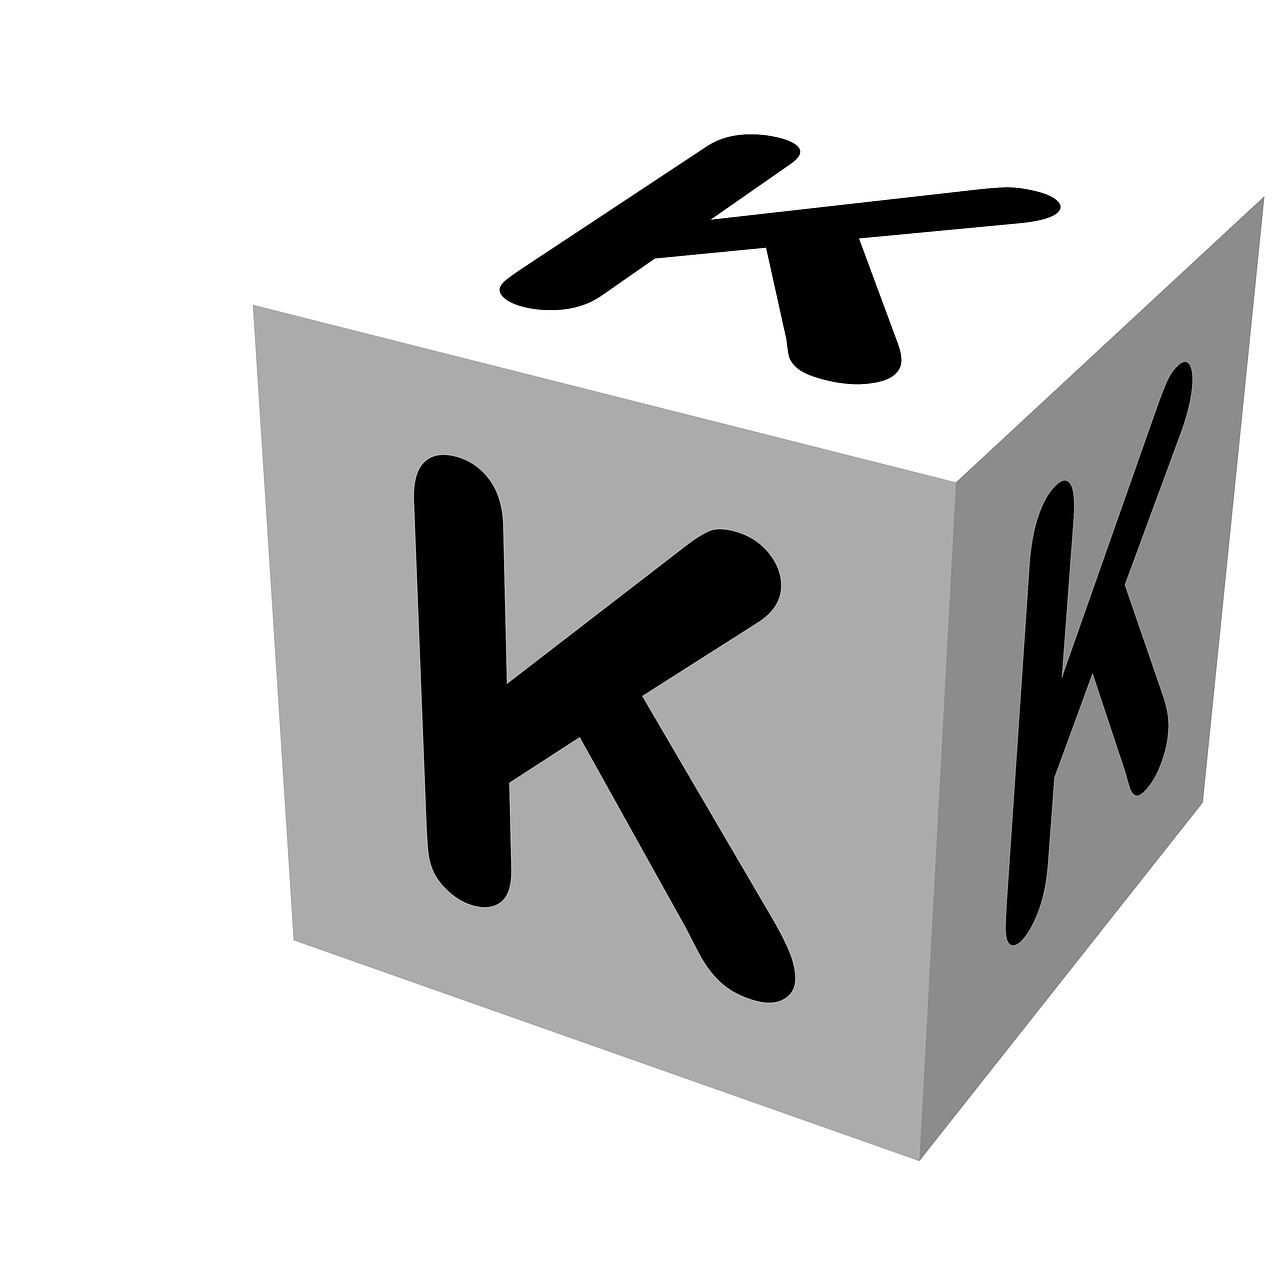 a black and white image of a letter k on a cube, a raytraced image, pixabay, drawn in microsoft paint, cartoon image, dice, wikihow illustration